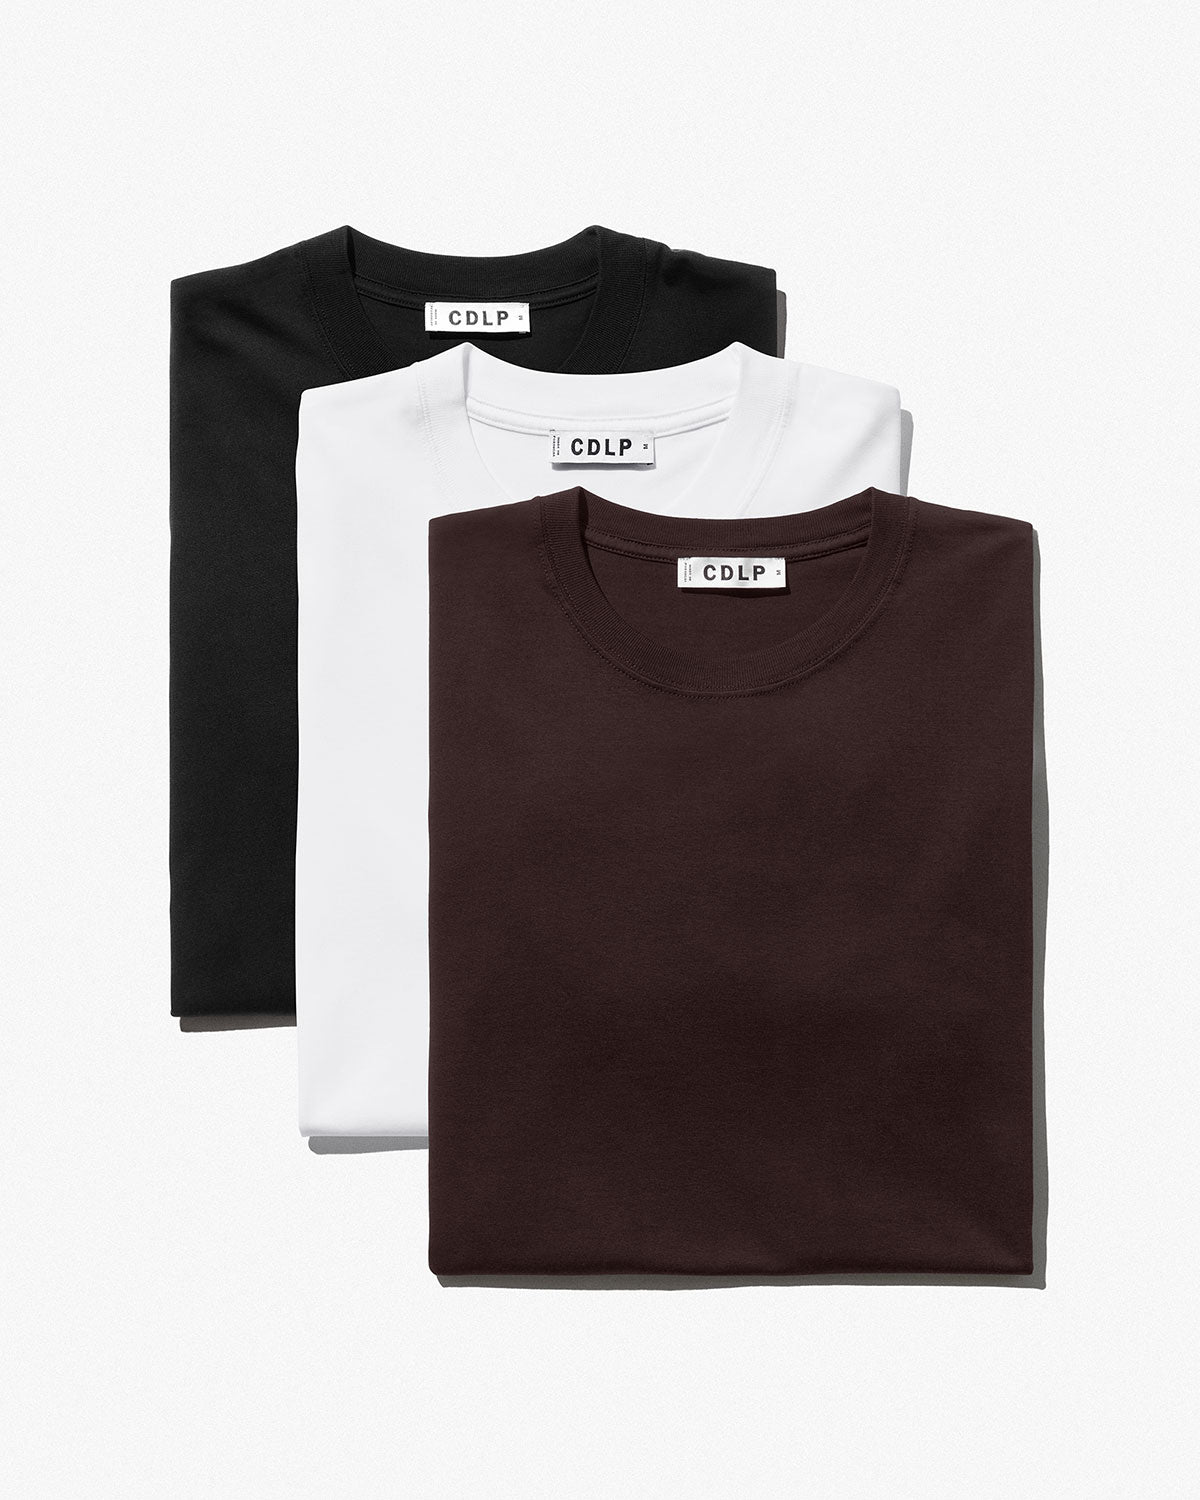 3 × Midweight T-Shirt in Black + White + Clay | Shop now – CDLP